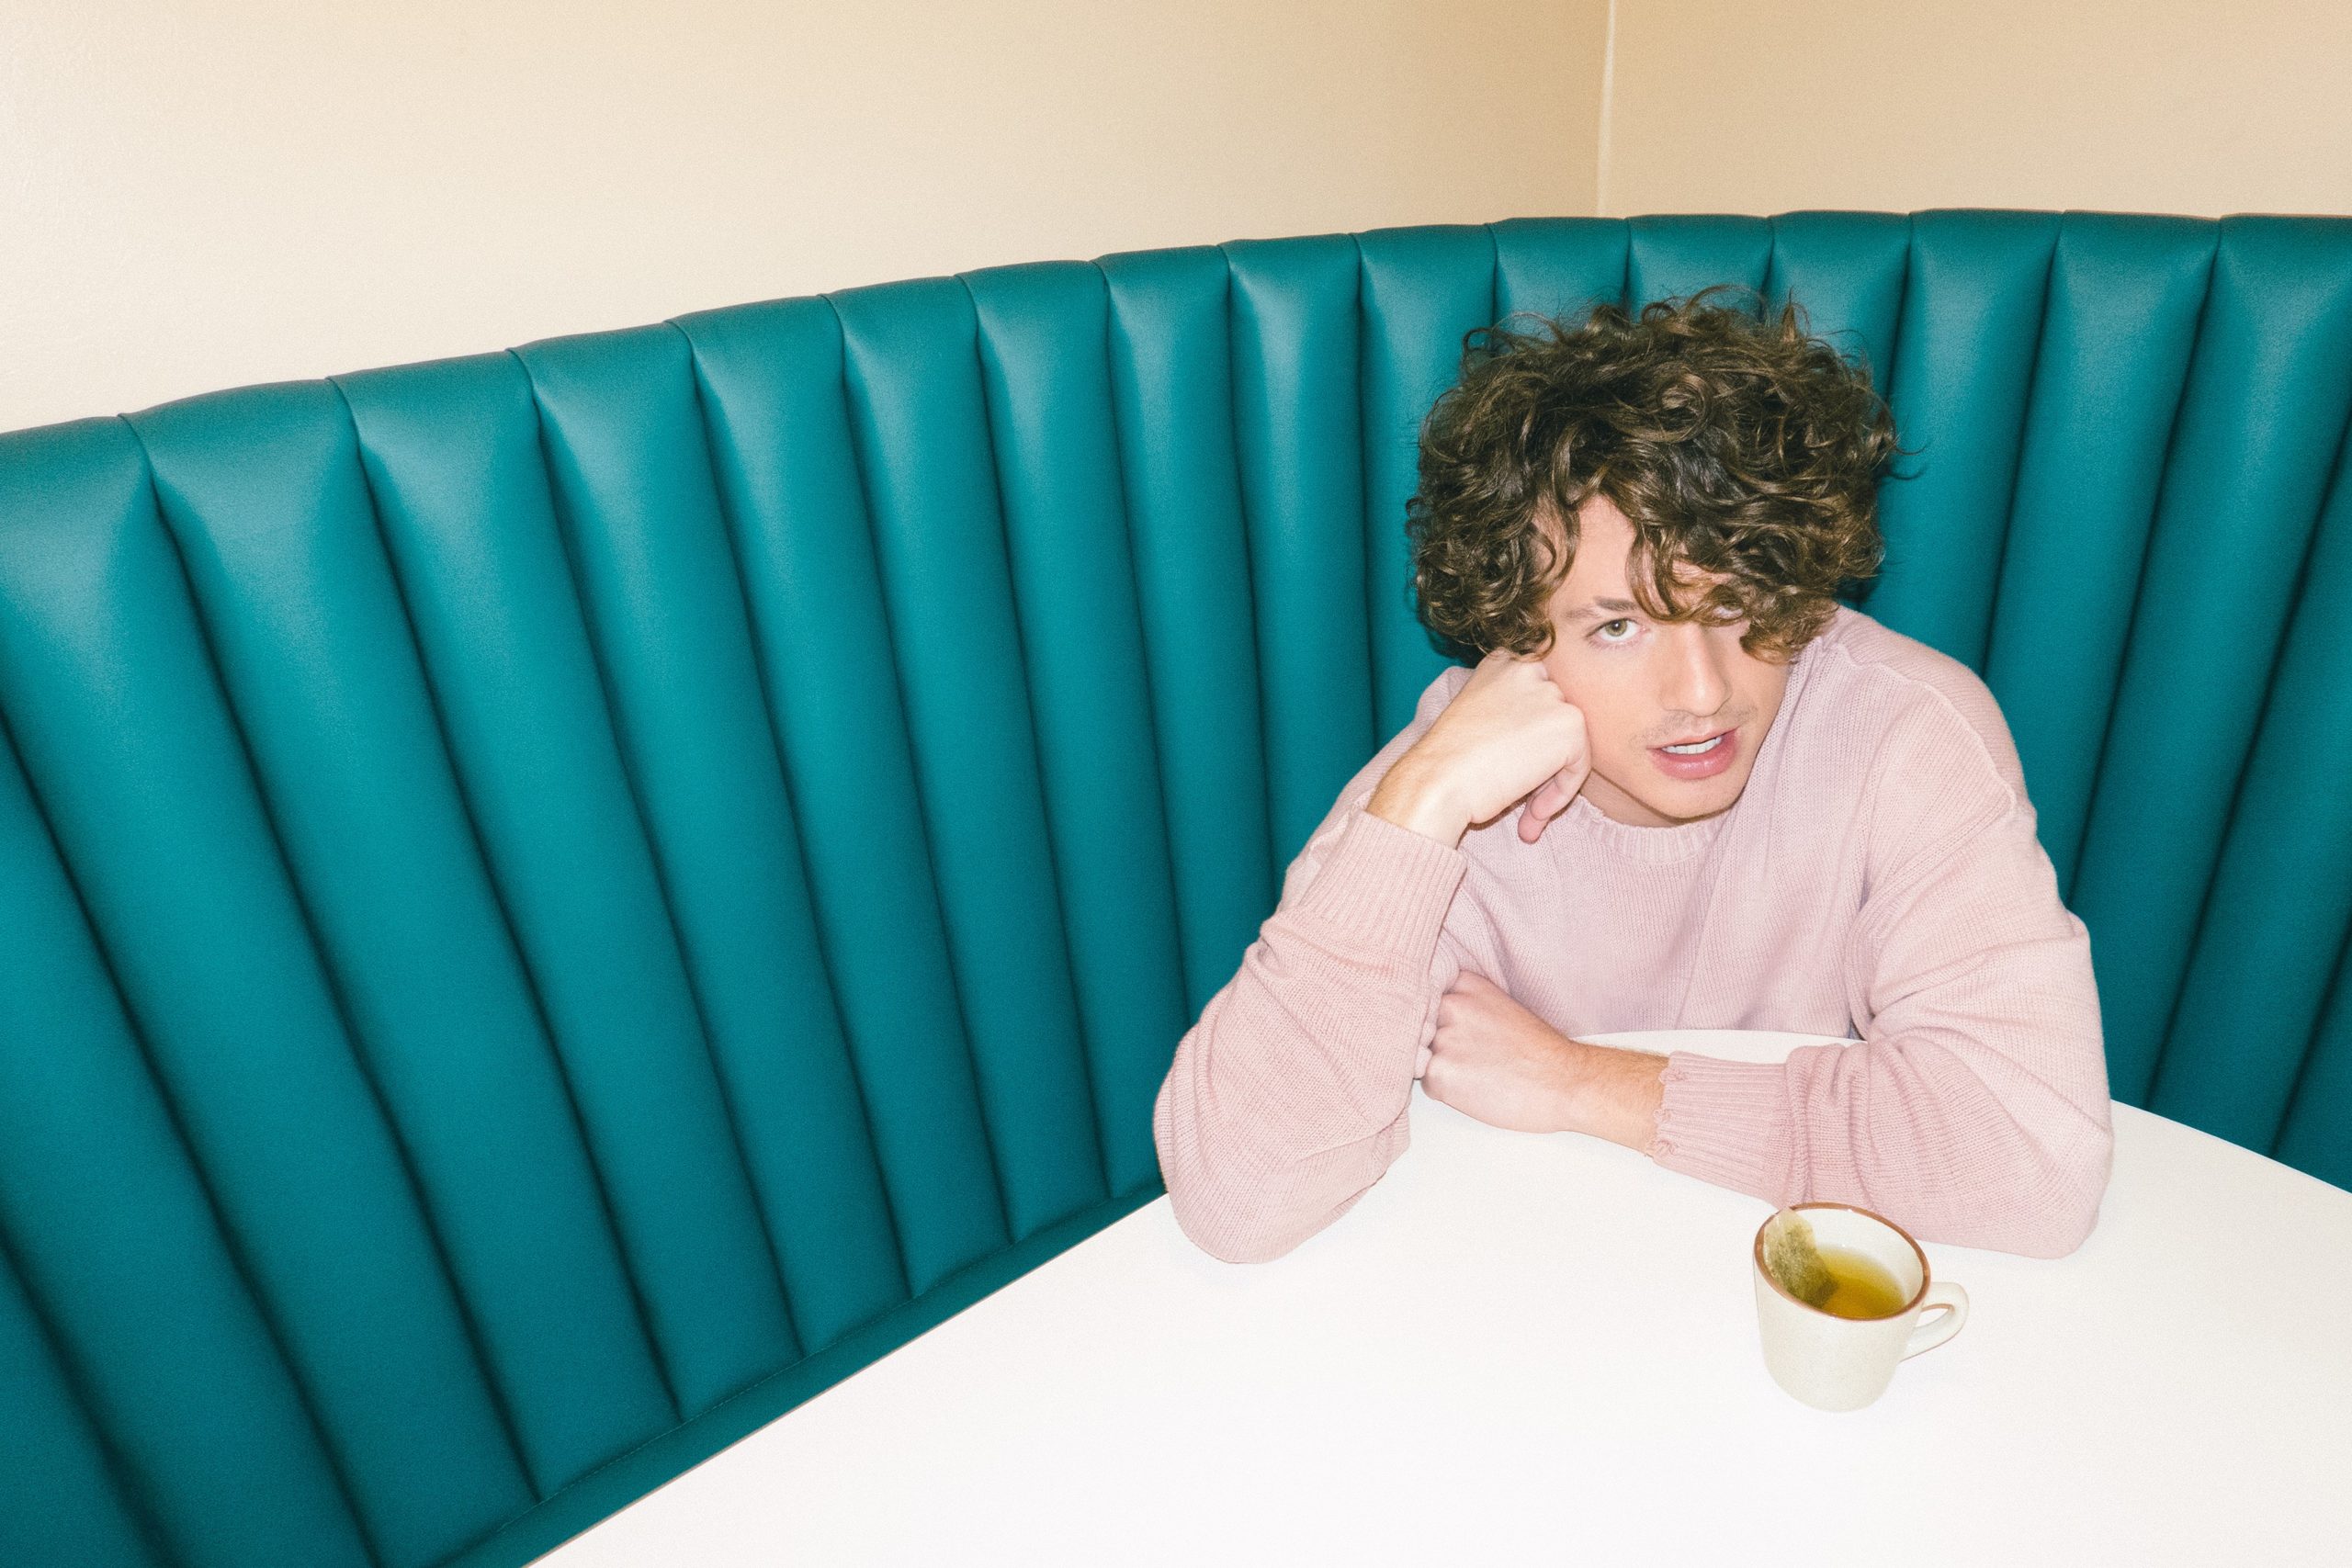 Charlie Puth Wants You to Give Your Body a New Single “Light Switch”